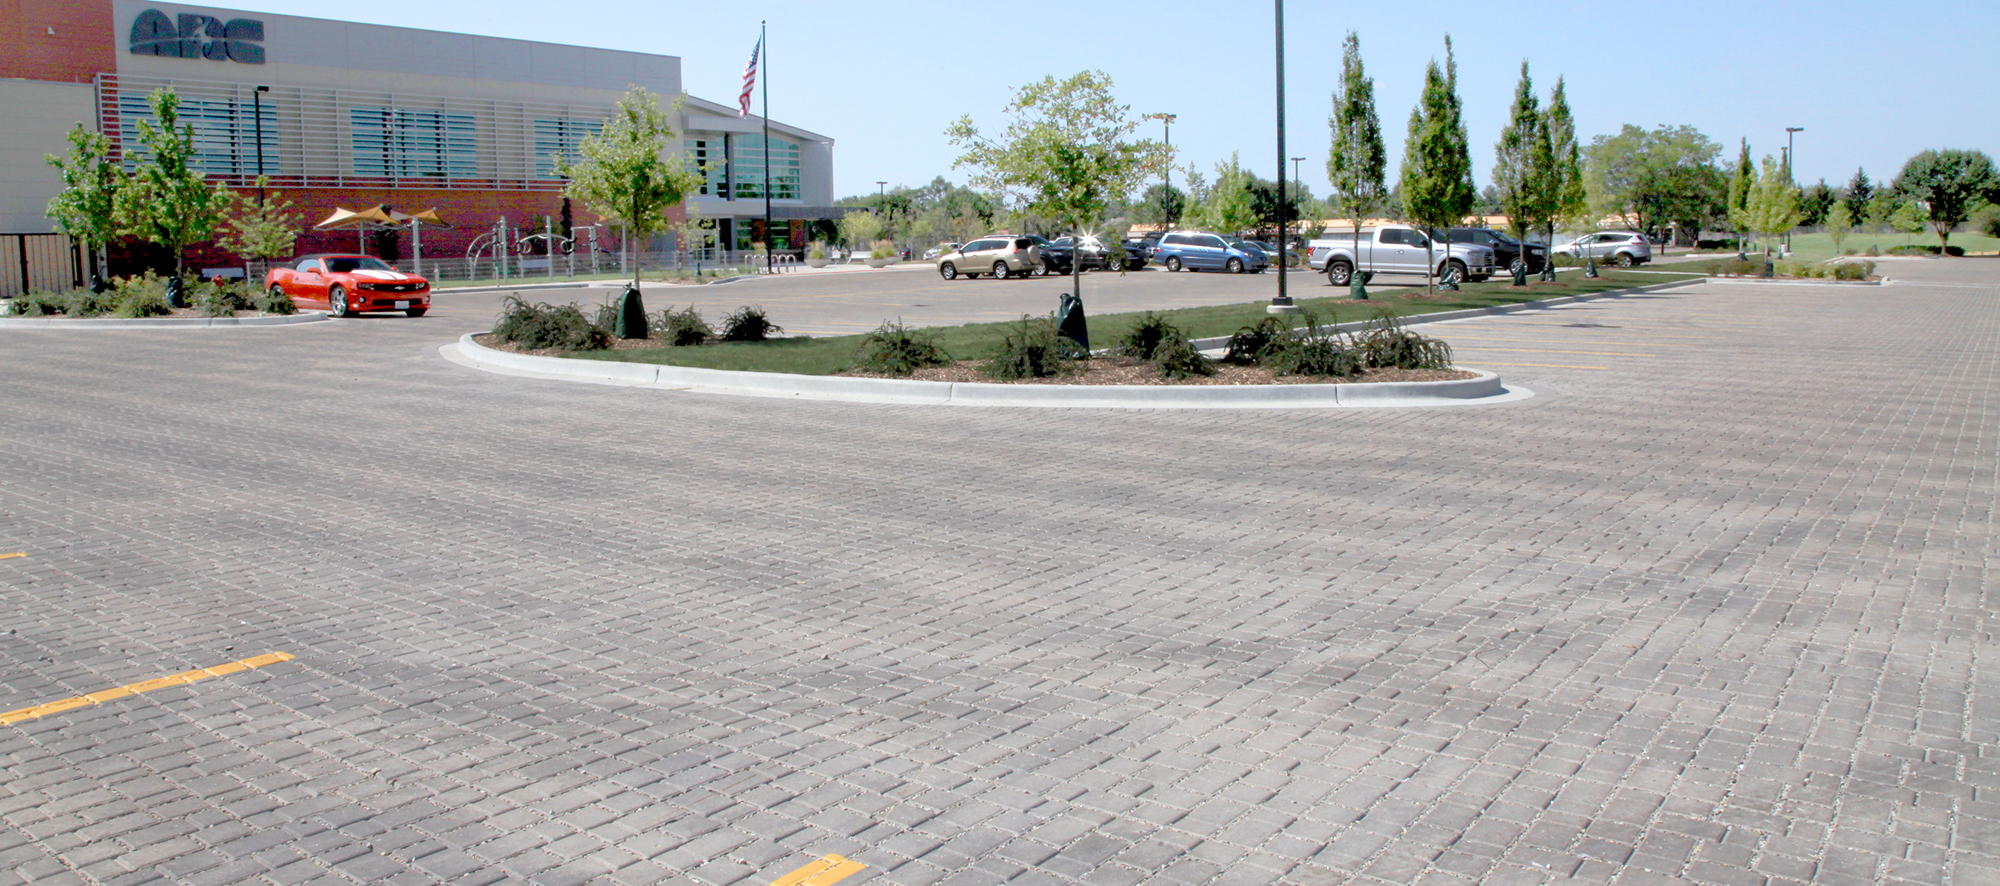 Cars park in the parking lot of an Athletic and Recreation Center, paved with Eco-Optiloc permeable pavers around shaped raised garden beds.